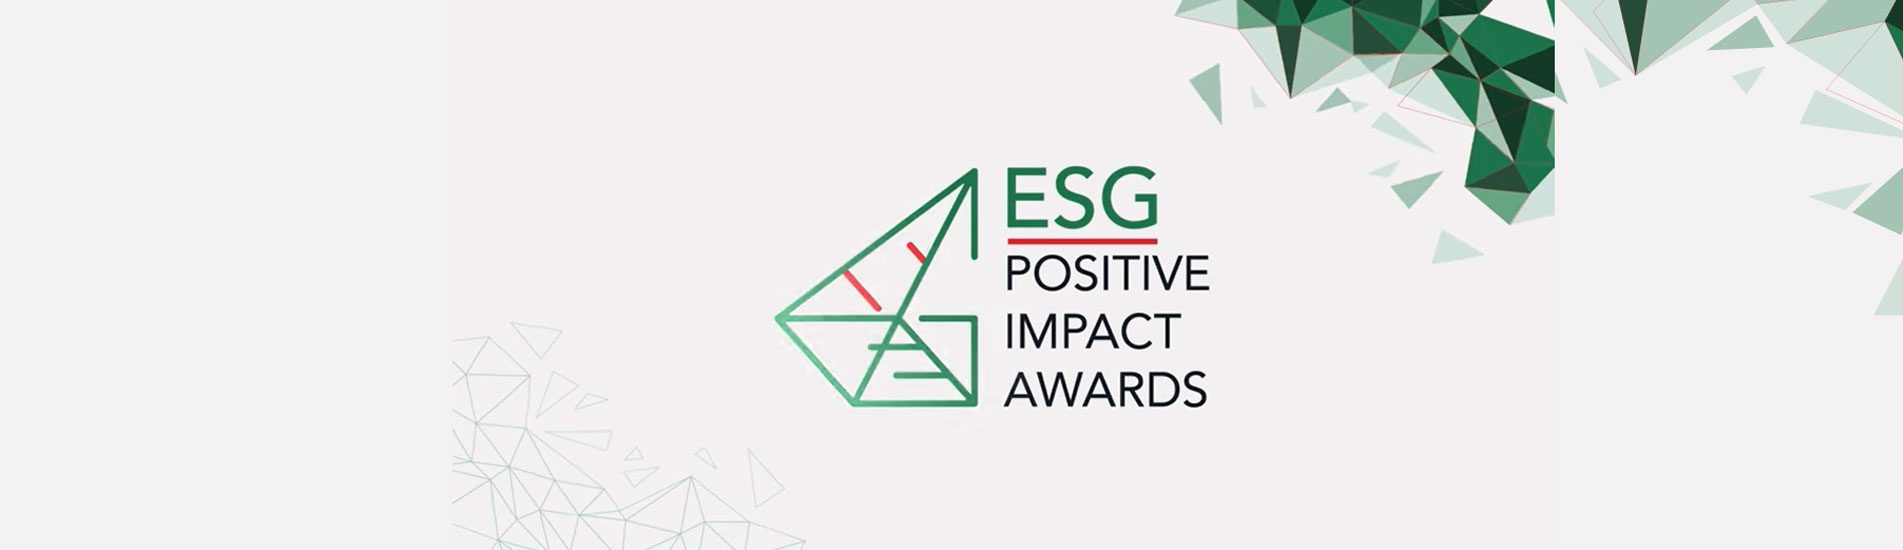 ESG Positive Impact Awards launched by STAR Media Group